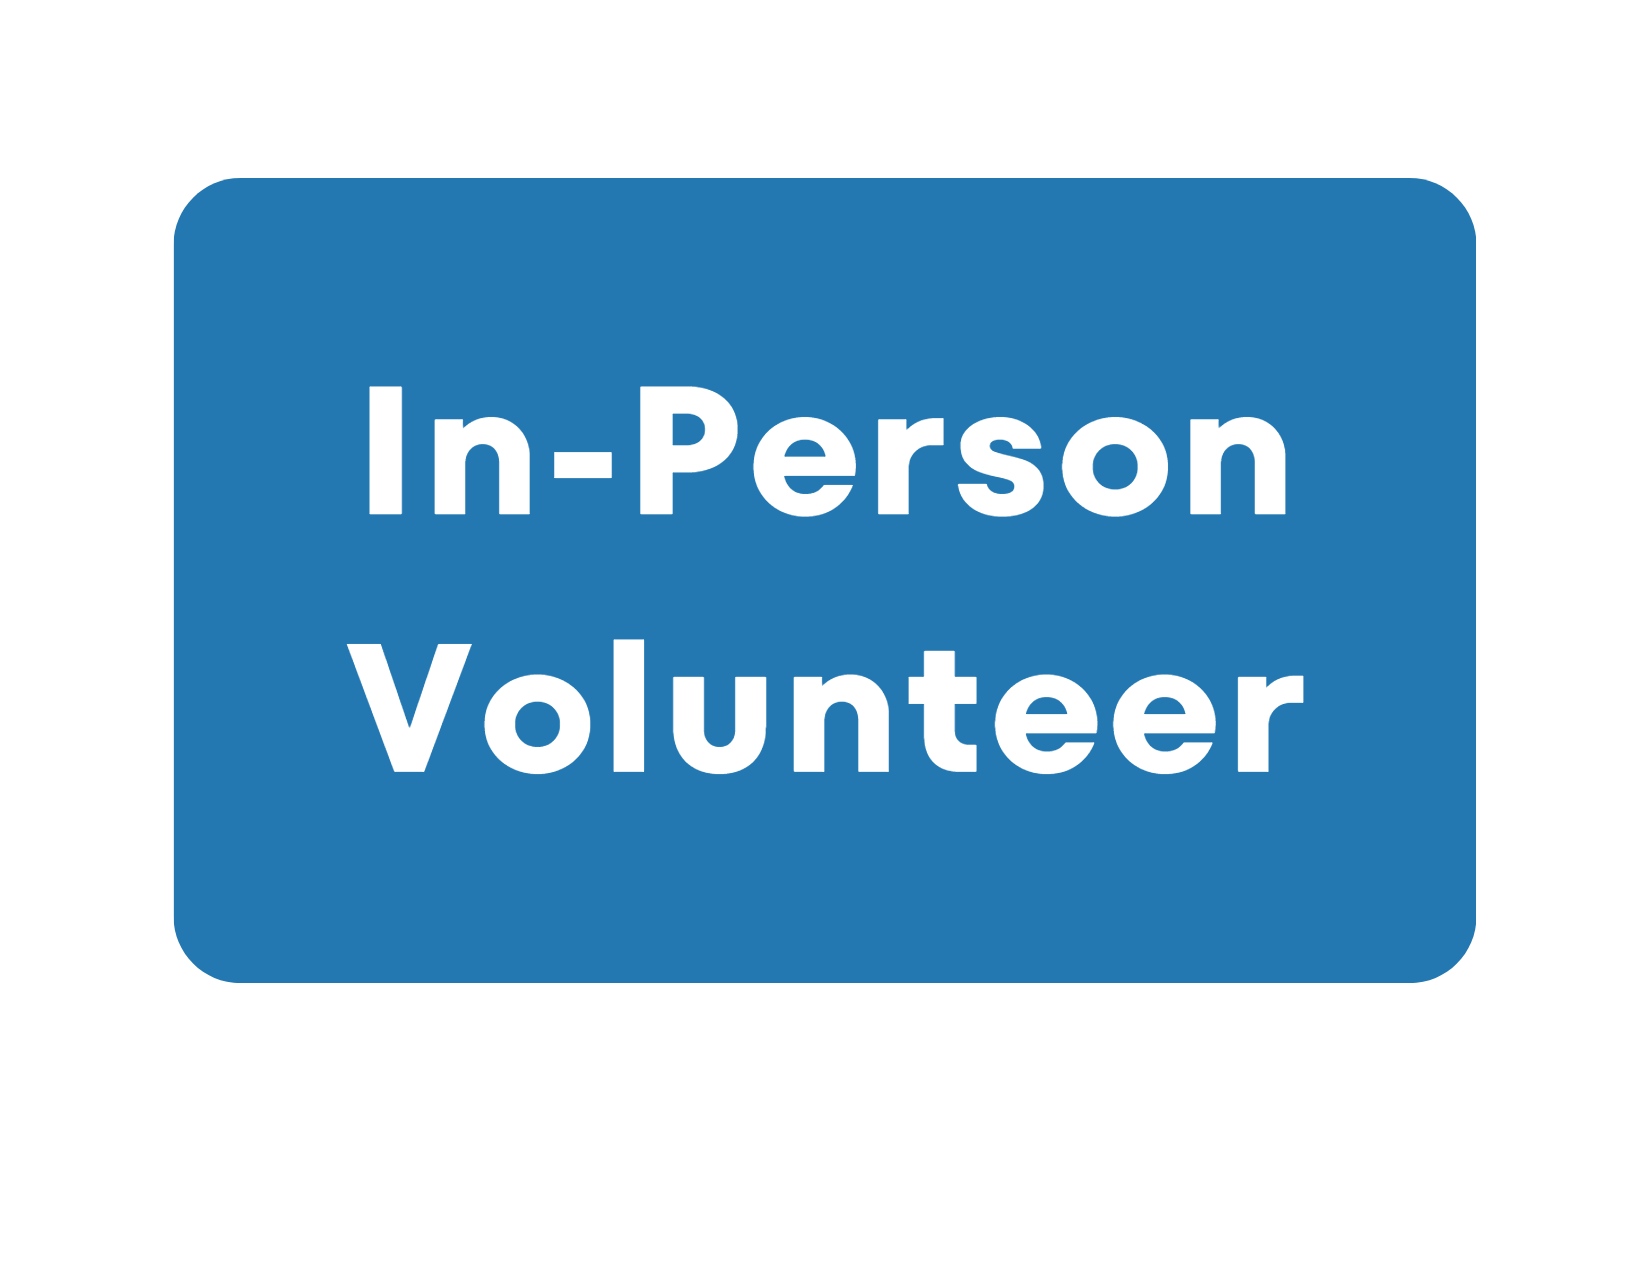 banner with the words "In-Person Volunteer"